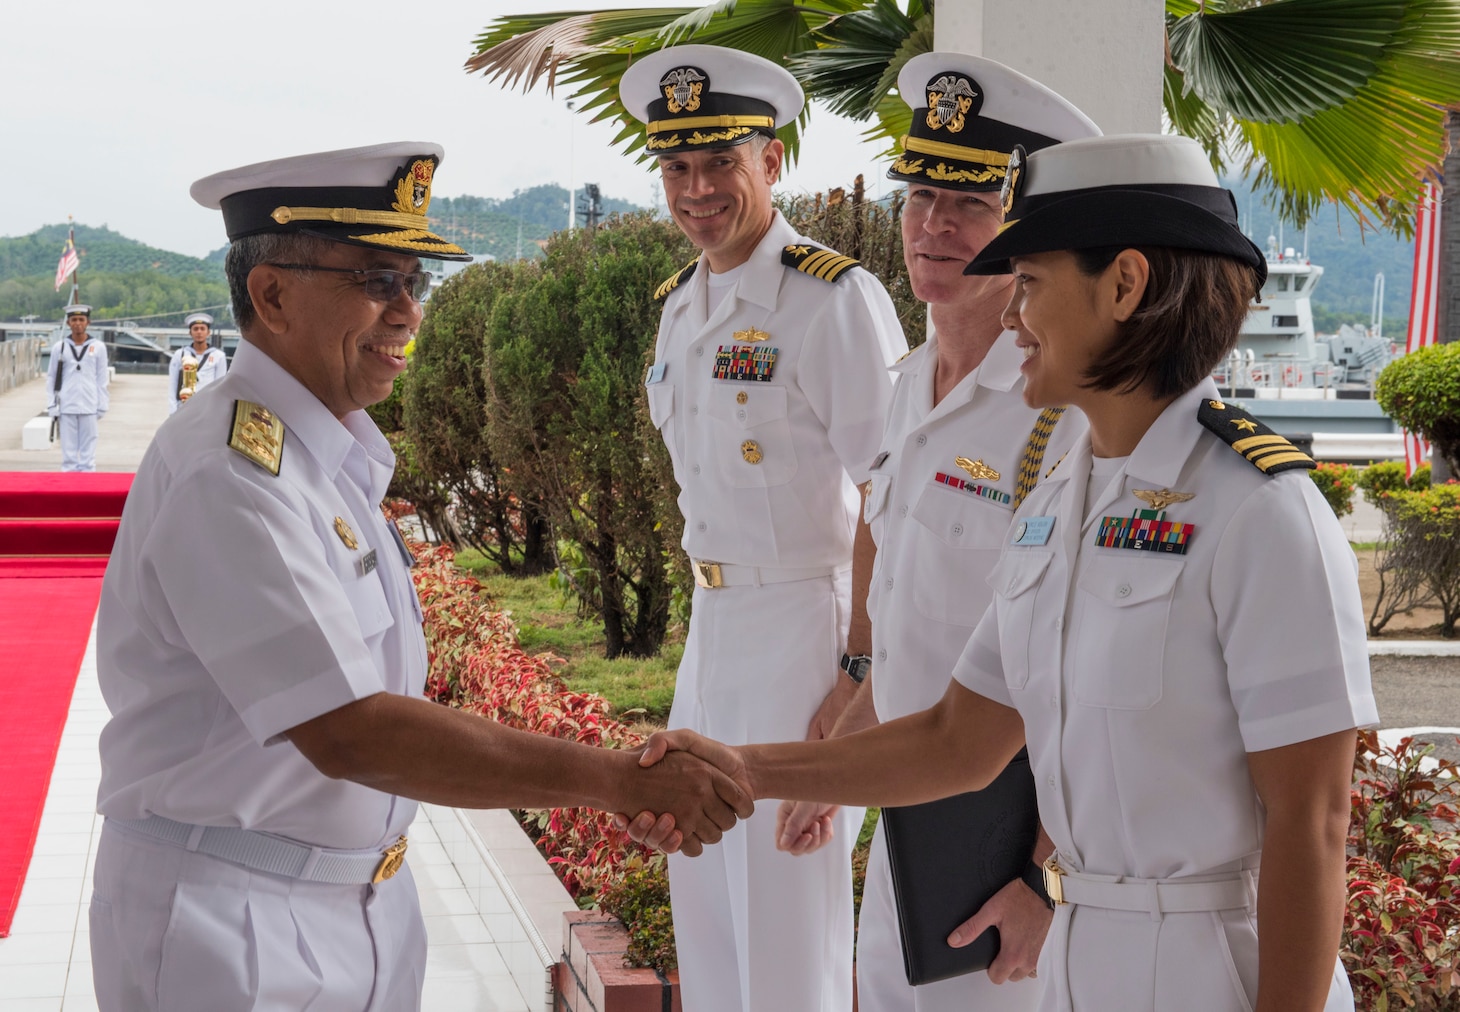 LUMUT, Malaysia (September 21, 2017) Royal Malaysian Navy Adm. Dato Seri Roslan, Commander, Western Fleet, greets U.S. Navy officers during an office call at Lumut Naval Base in Lumut, Malaysia as a part of Maritime Training Activity (MTA) Malaysia Sept. 21, 2017.  MTA Malaysia 2017 is a continuation of 23 years of maritime engagements between the U.S. Navy and Royal Malaysian Navy serving to enhance mutual capabilities in ensuring maritime security and stability.